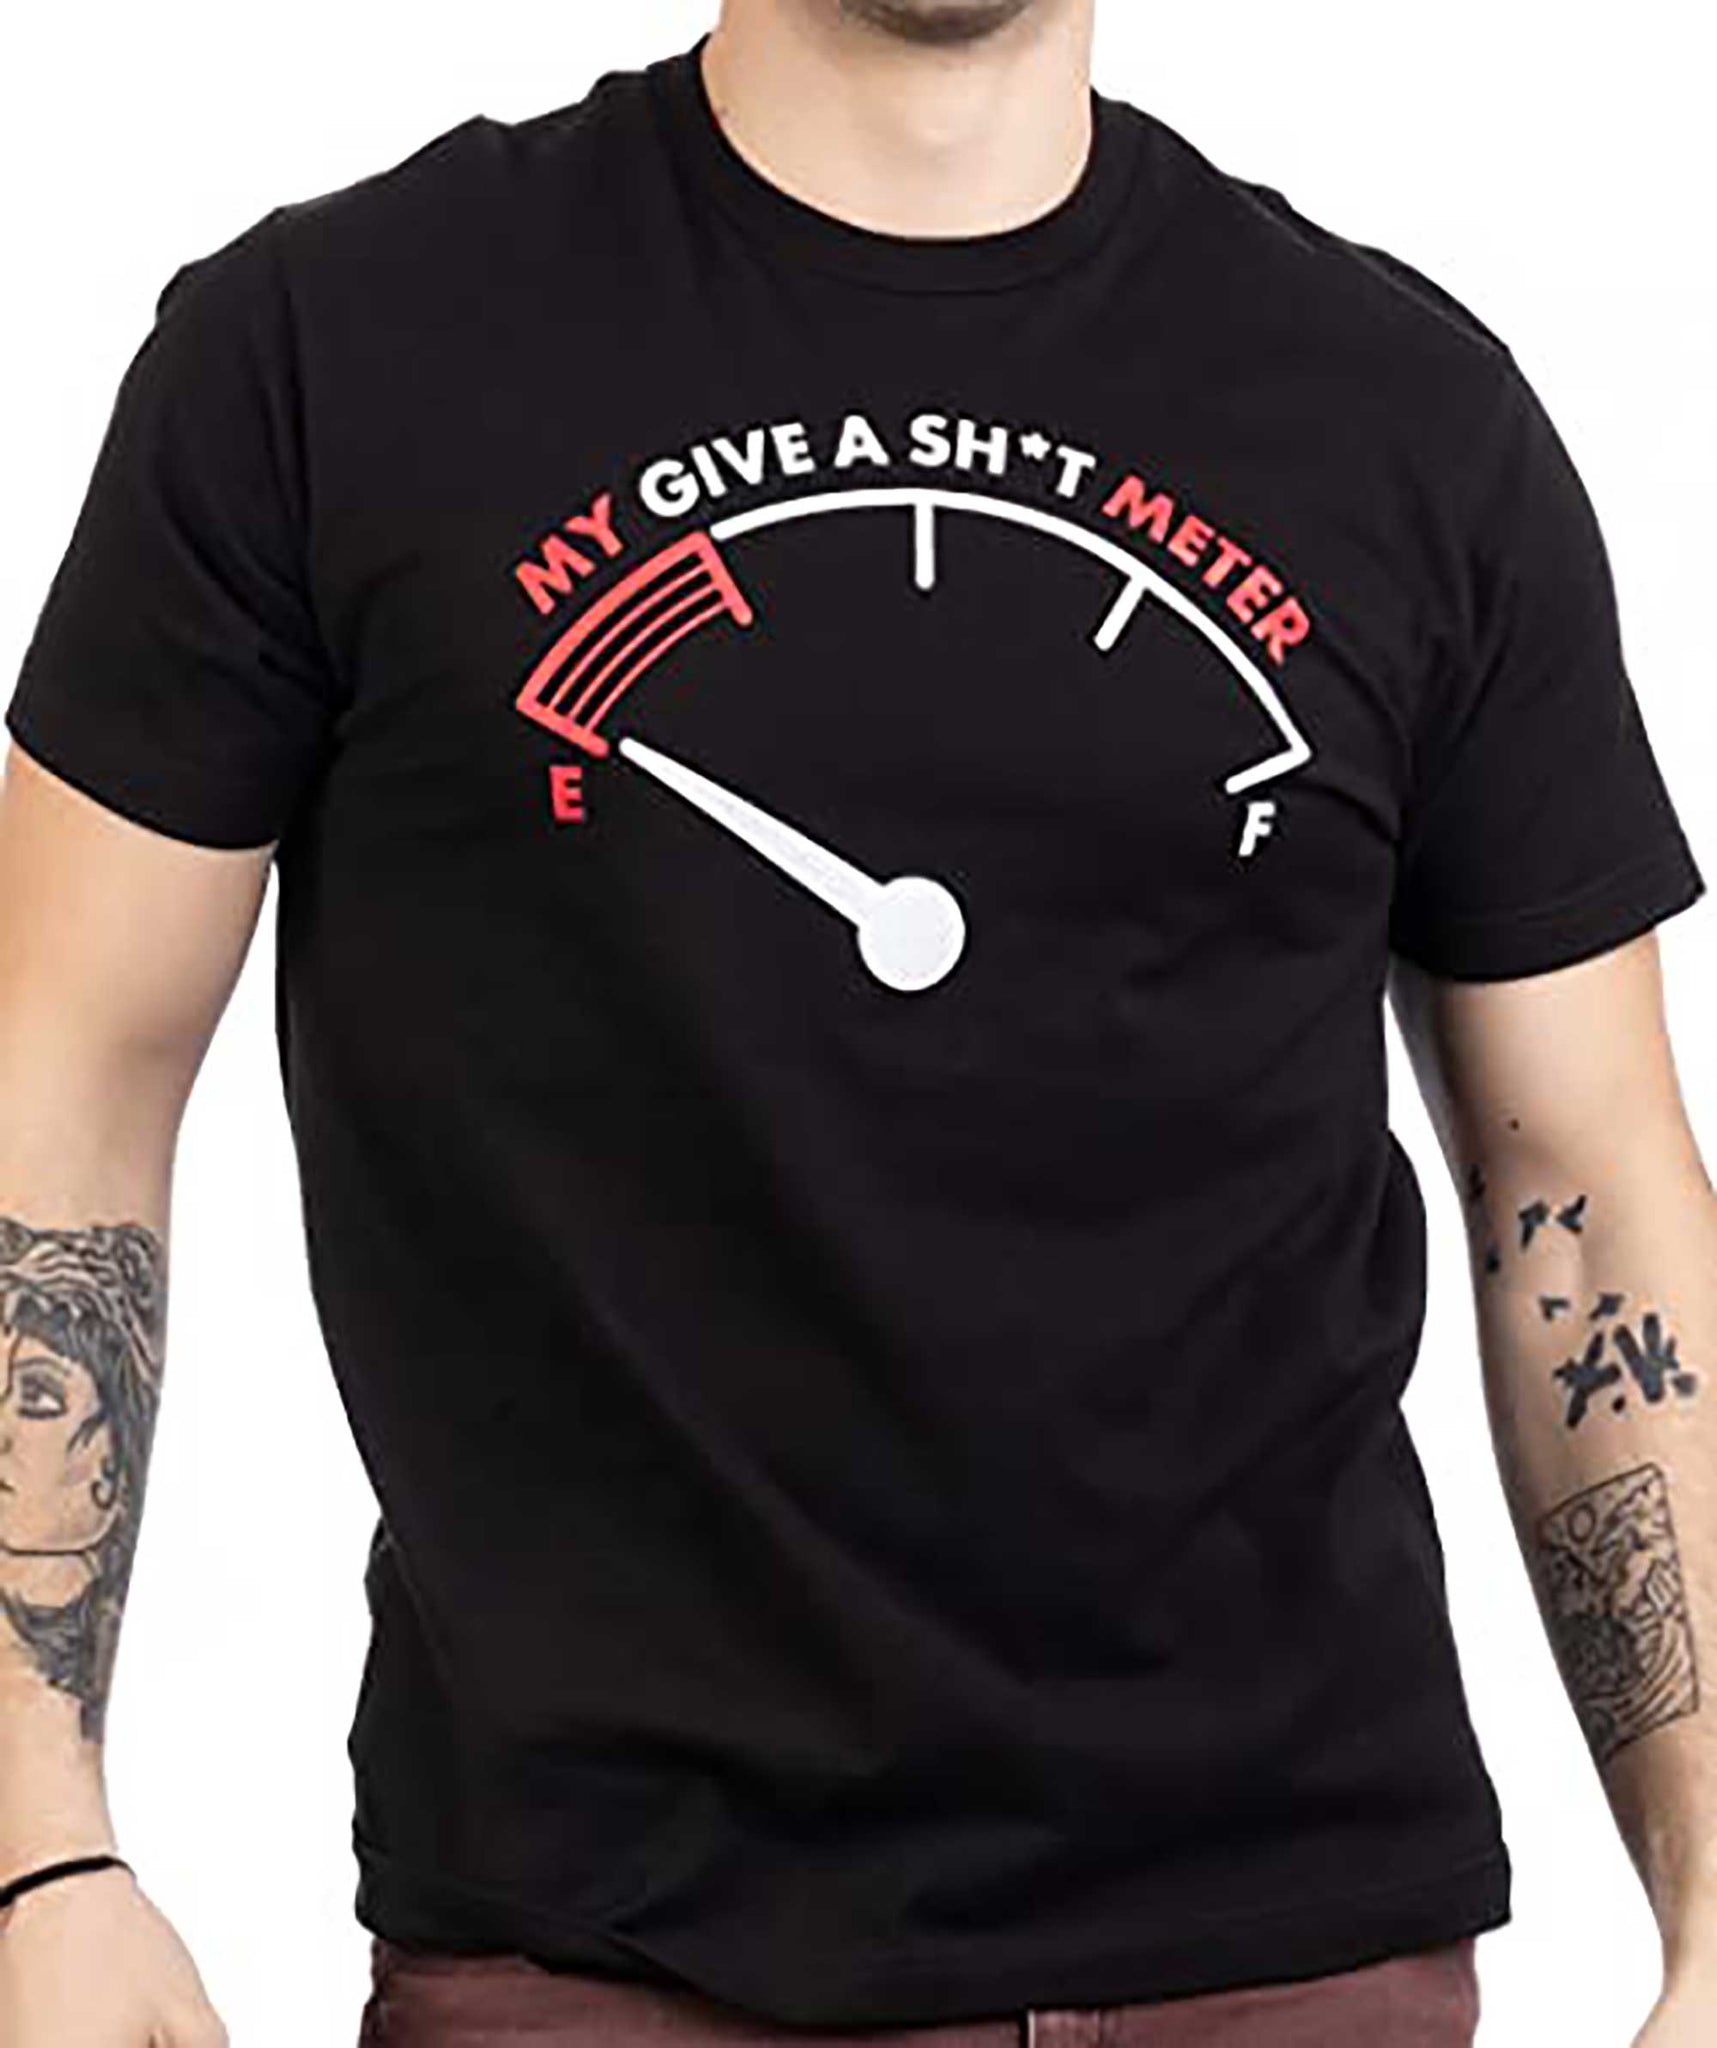 Skitongift My Give A Sht Meter Is Empty Funny Sarcastic Saying Comment Joke Men T Shirt